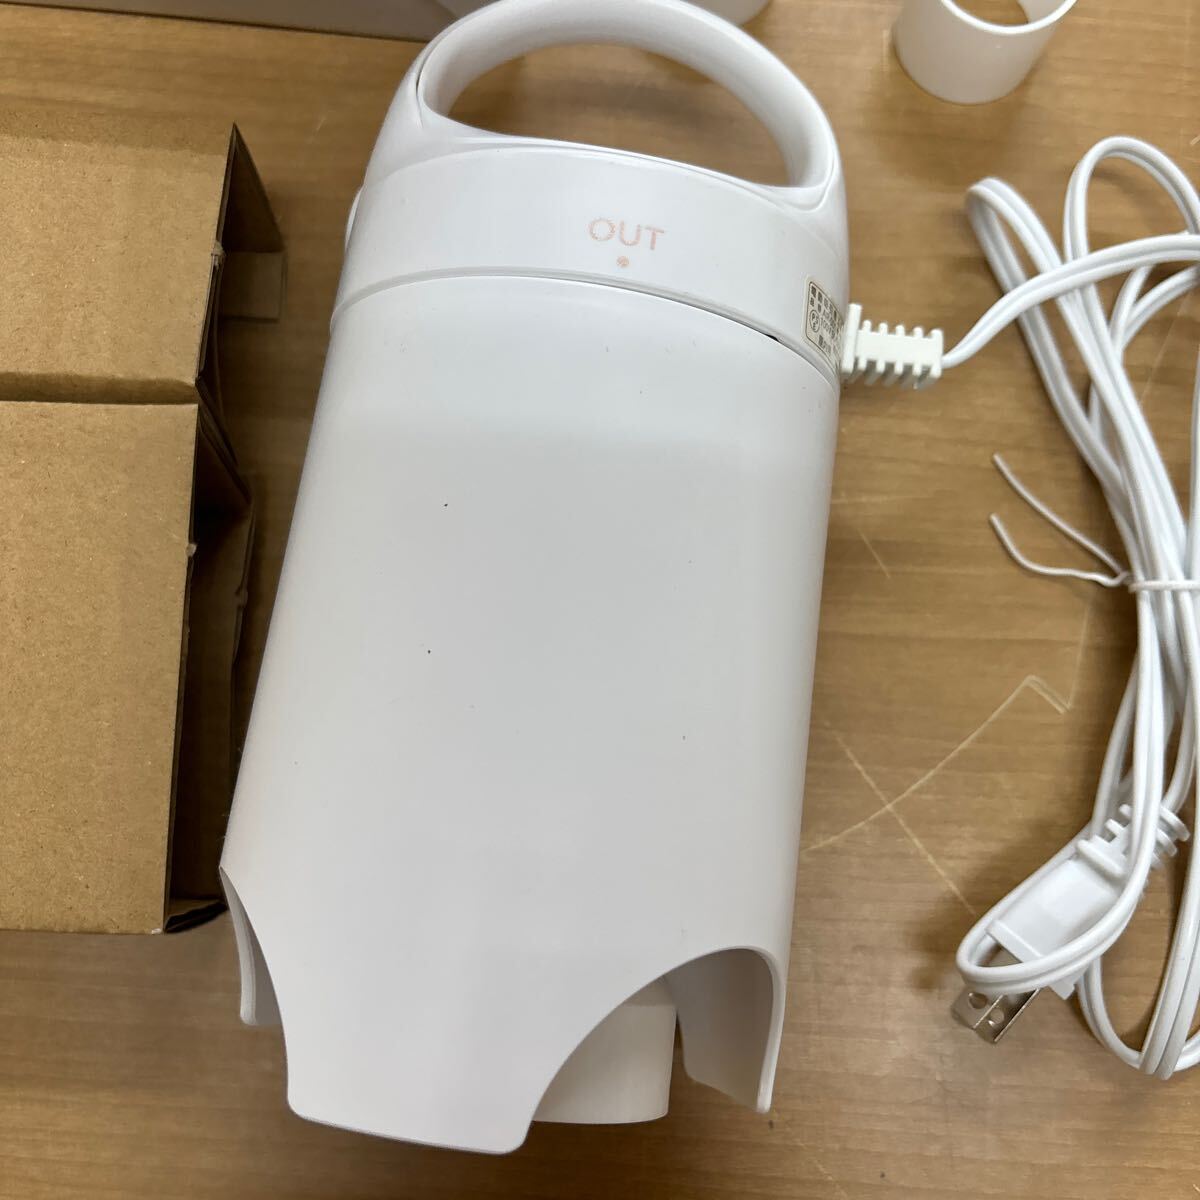 TA-658*60 size *Airshe ash electric absorption machine vacuum cleaner none . absorption compression valve(bulb) type vacuum bag correspondence adaptor attaching . operation verification ending 